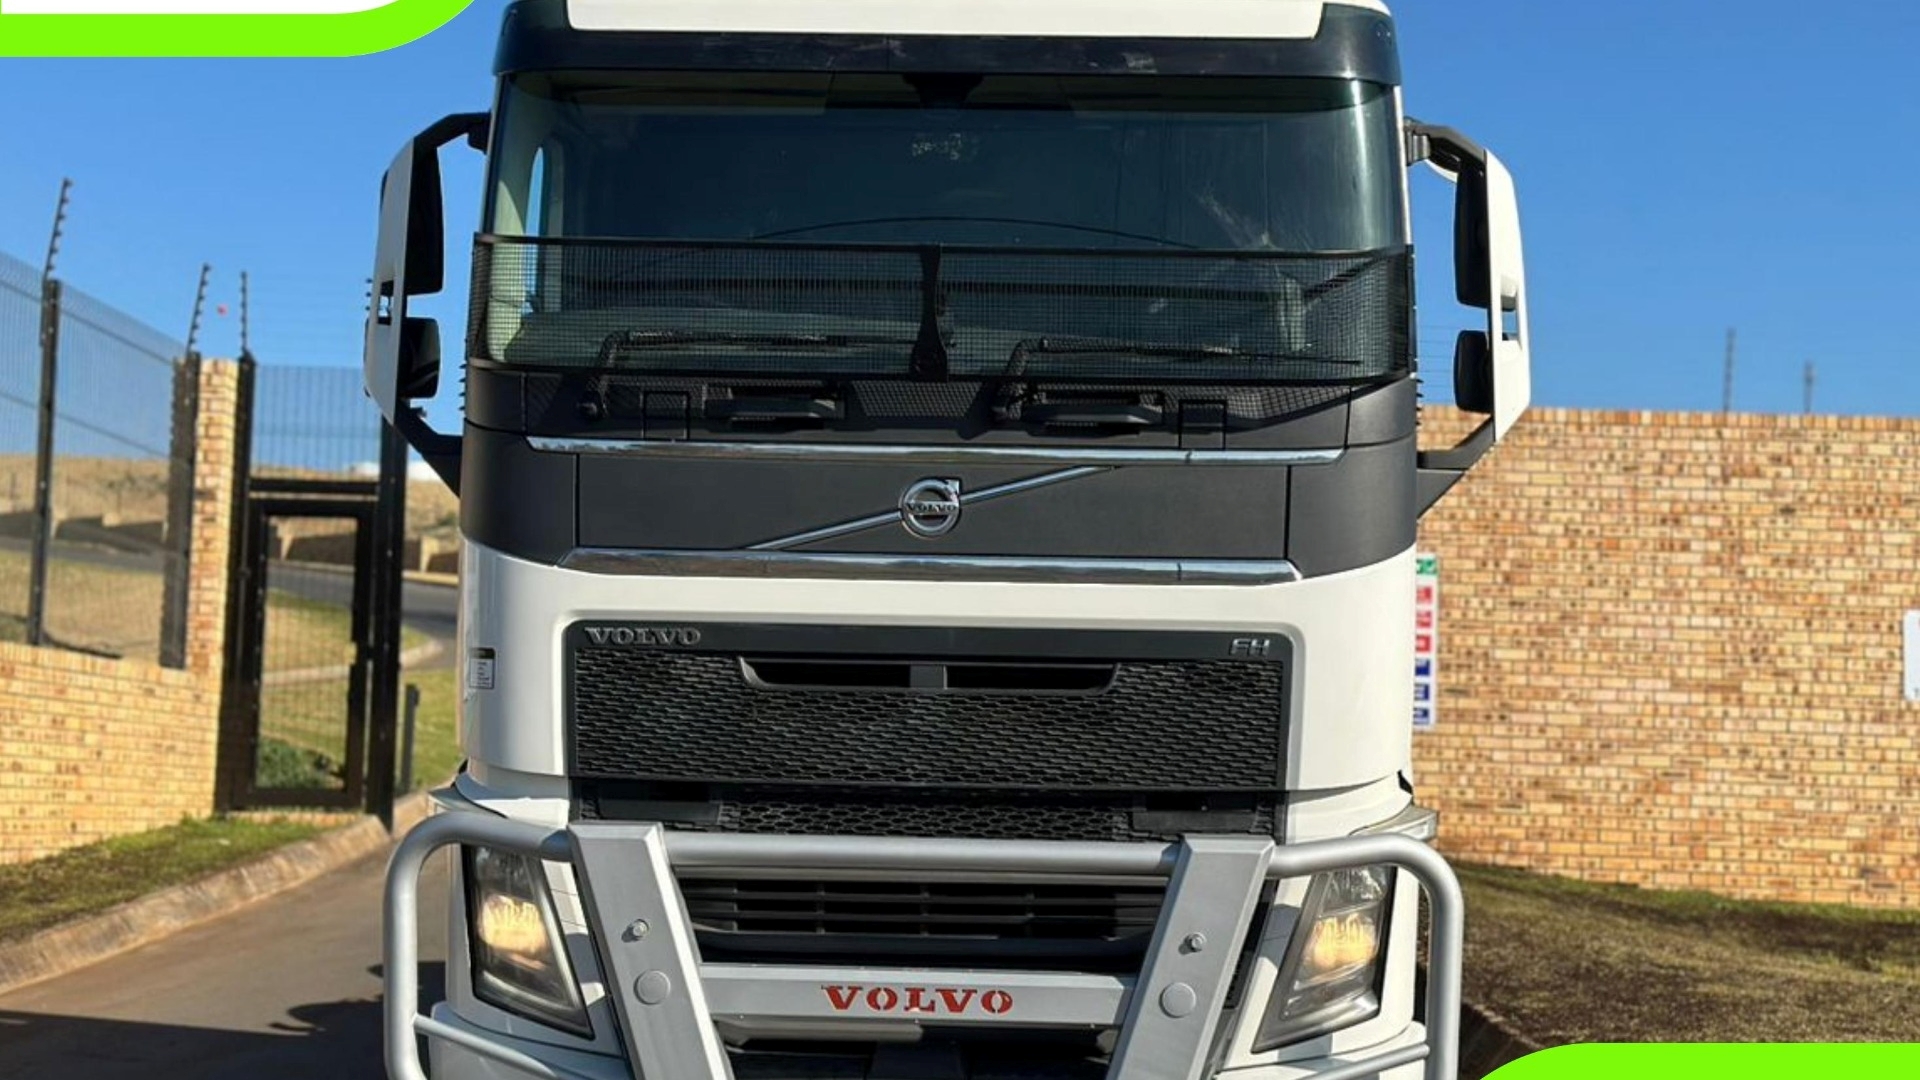 Volvo Truck tractors Volvo Madness Special 5: 2019 Volvo FH440 2019 for sale by Truck and Plant Connection | Truck & Trailer Marketplace